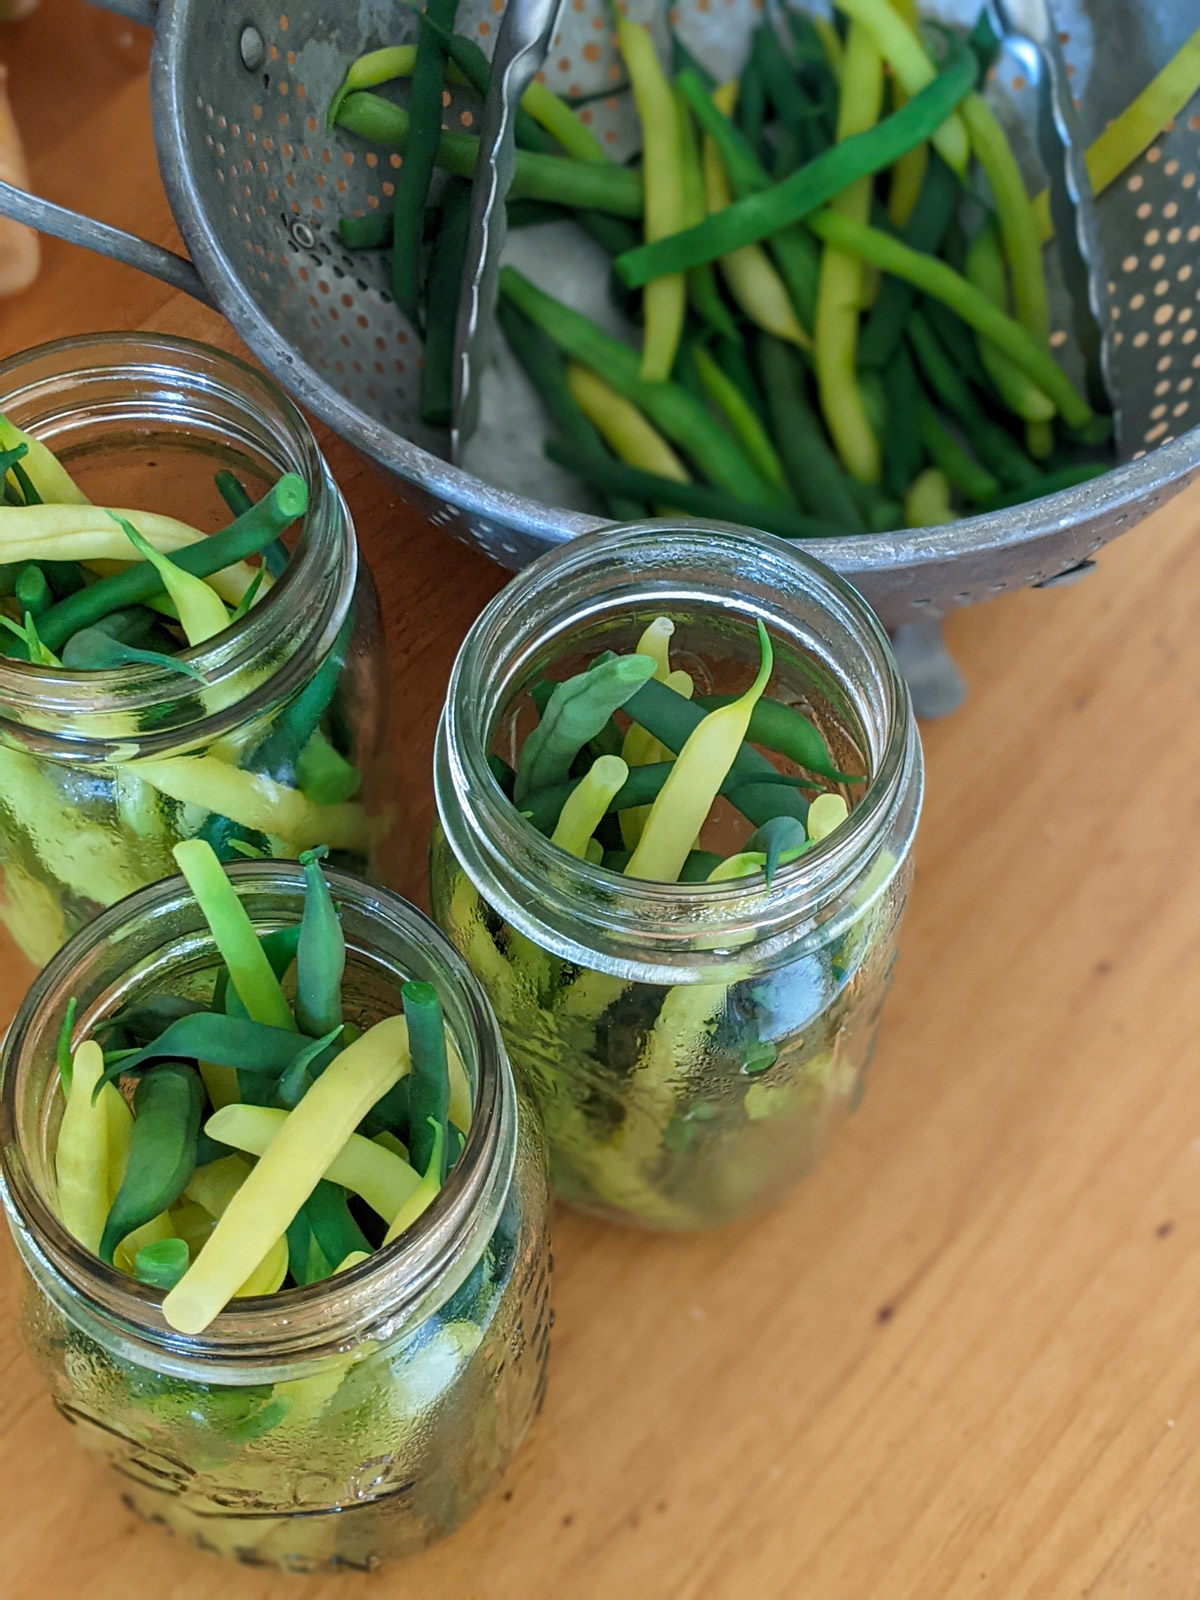 Blanched green and yellow beans in 3 glass jars with a colander of more beans.